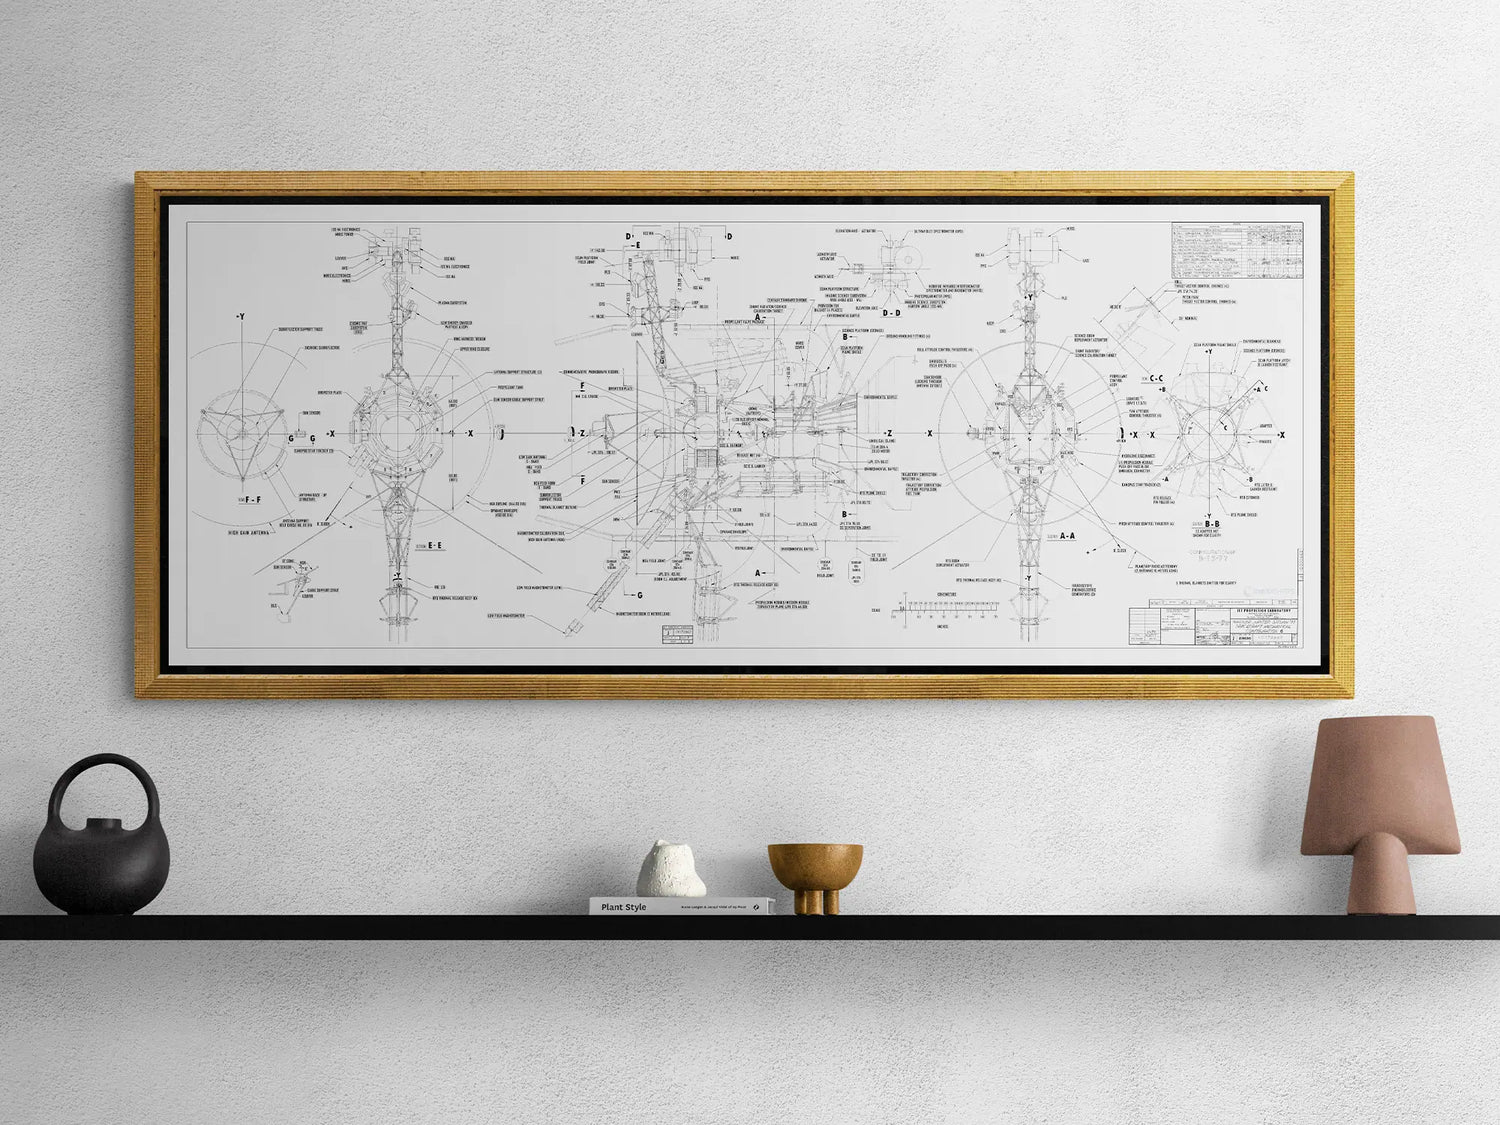 Voyager Space Probes Blueprint | Rocket Blueprint Posters | NASA | JPL | A framed technical drawing of the Voyager probes hangs on a white wall. The drawing, encased in a gold frame with a black border, features detailed schematics and labels of various components of the spacecraft. Below the frame, a minimalist black shelf holds a few small decorative items, including a black teapot, a white ceramic piece, and a small brown lamp.